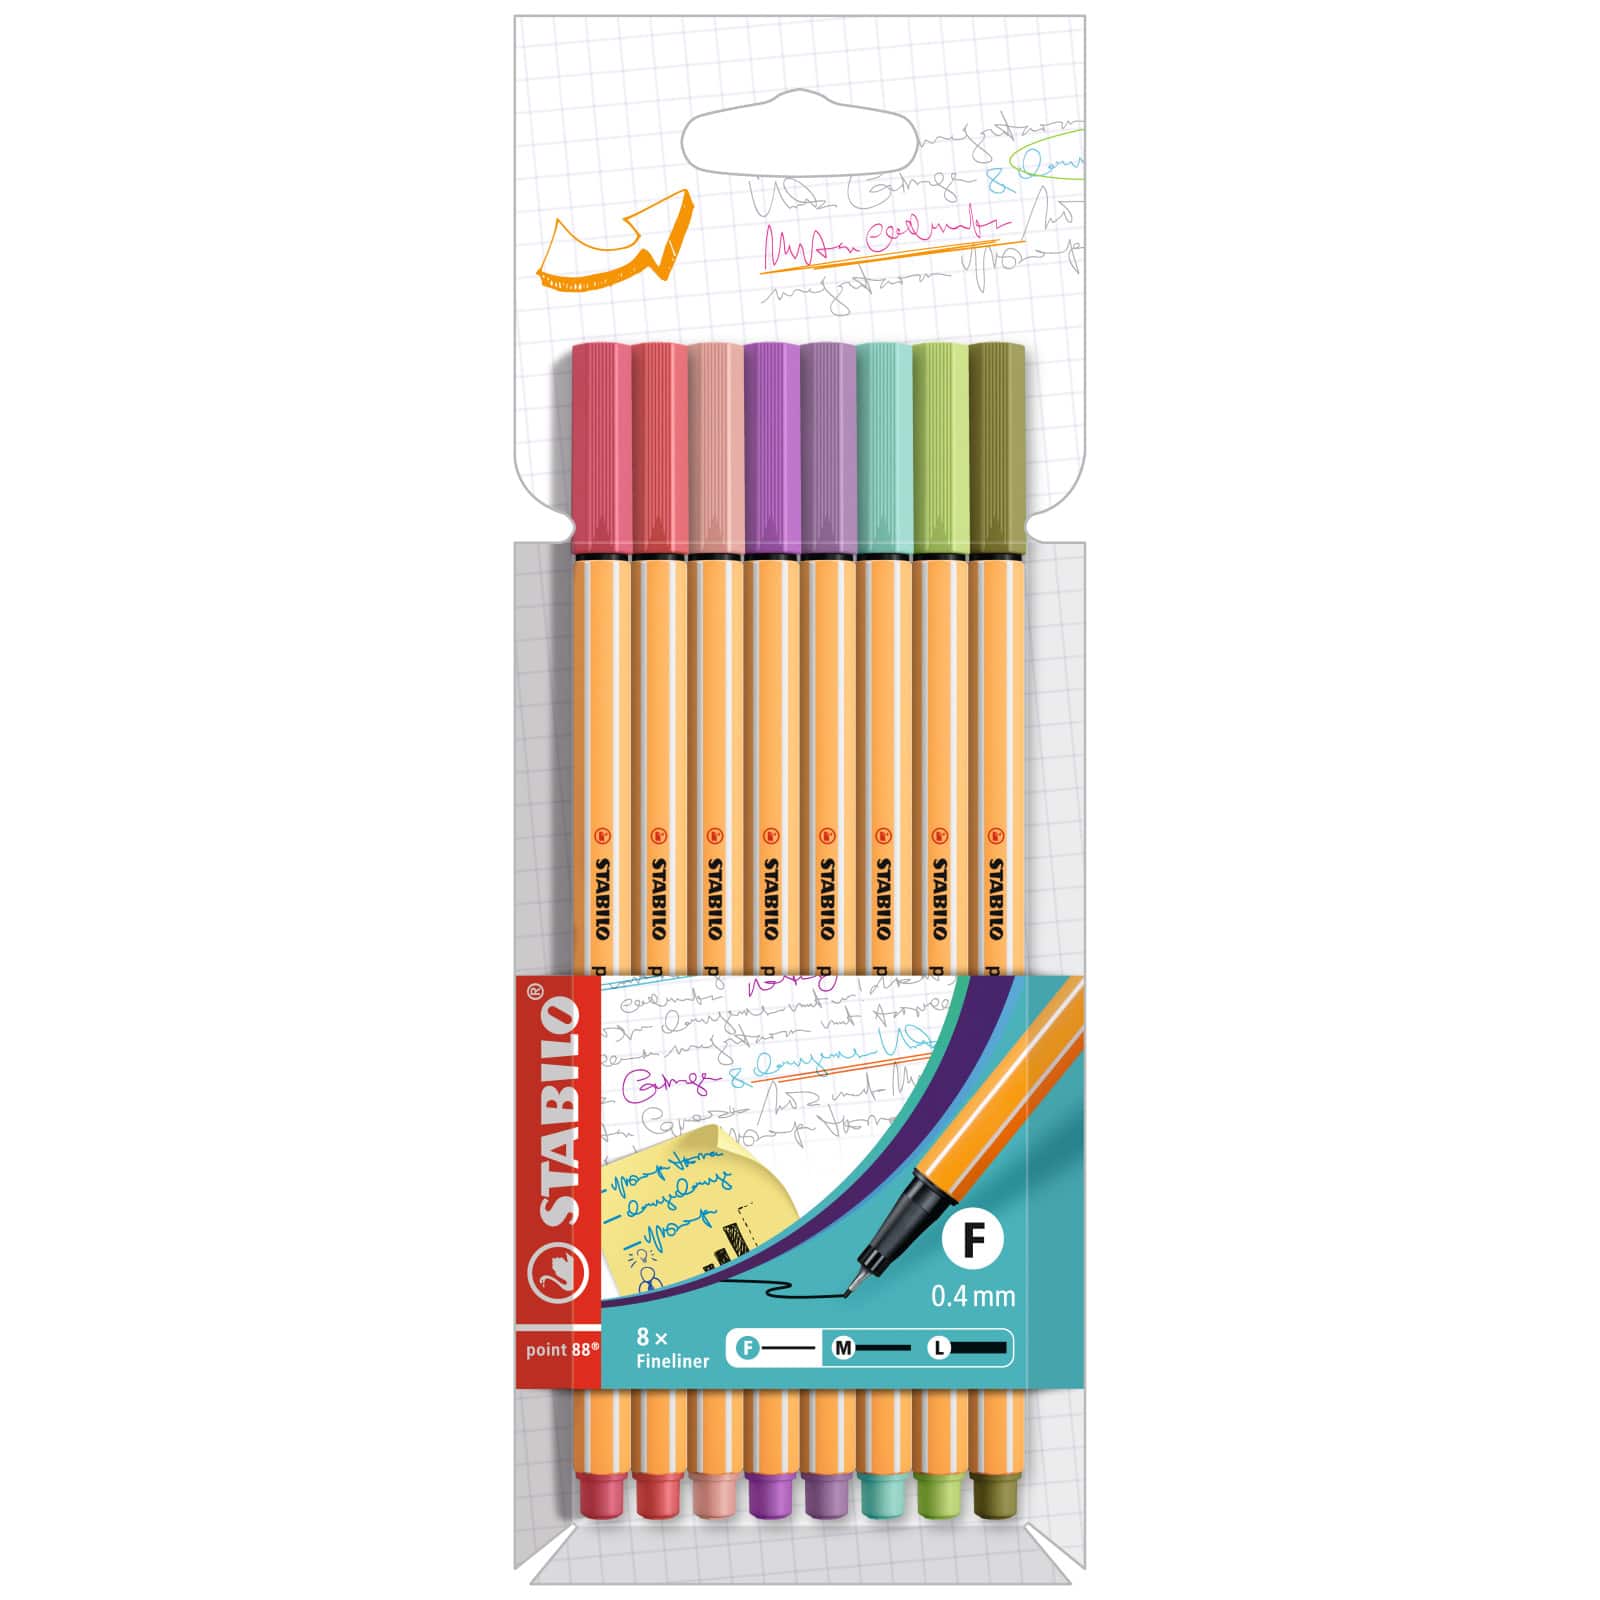 88/8-01 Wallet of 8 Assorted Pastel Colours Stabilo Point 88 Fineliner 